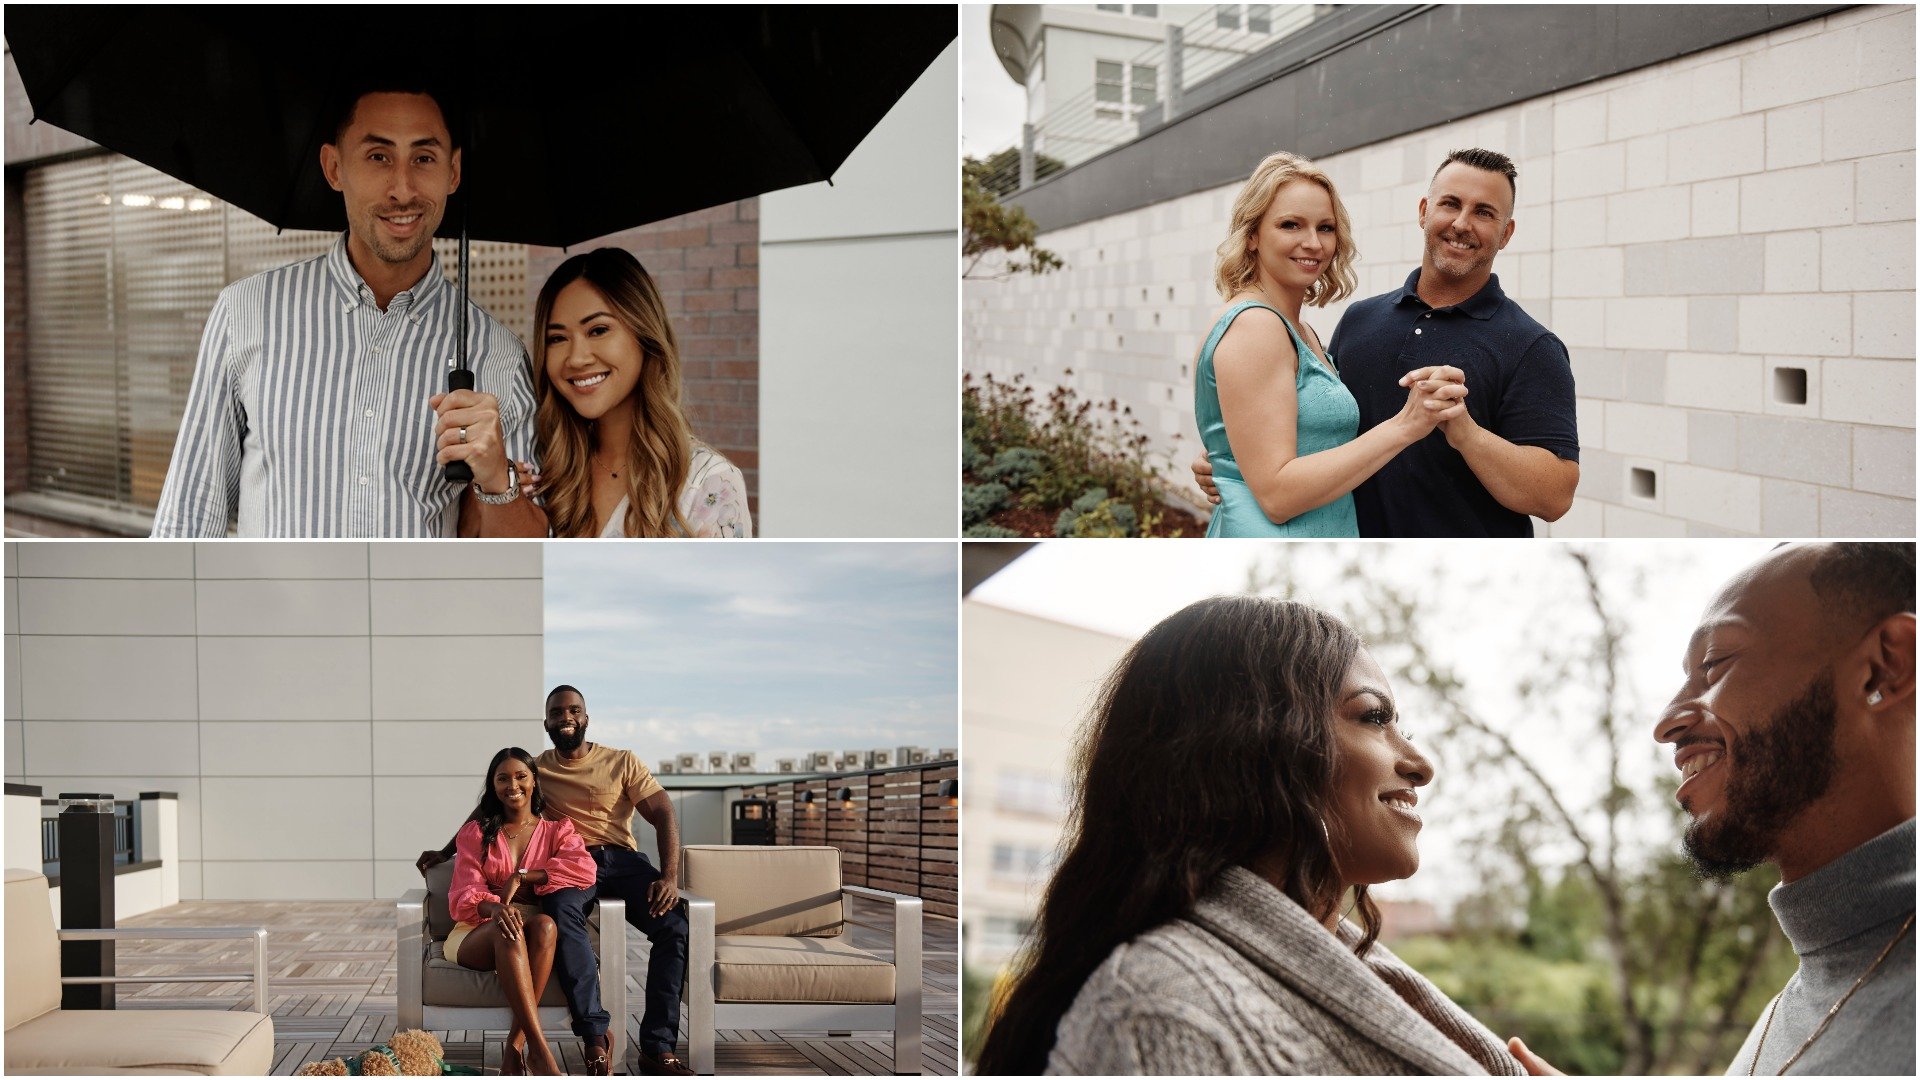 Collage of four couples from 'Married at First Sight' Season 14: Steve and Noi, Lindsay and Mark, Katina and Olajuwon, and Jasmina and Michael